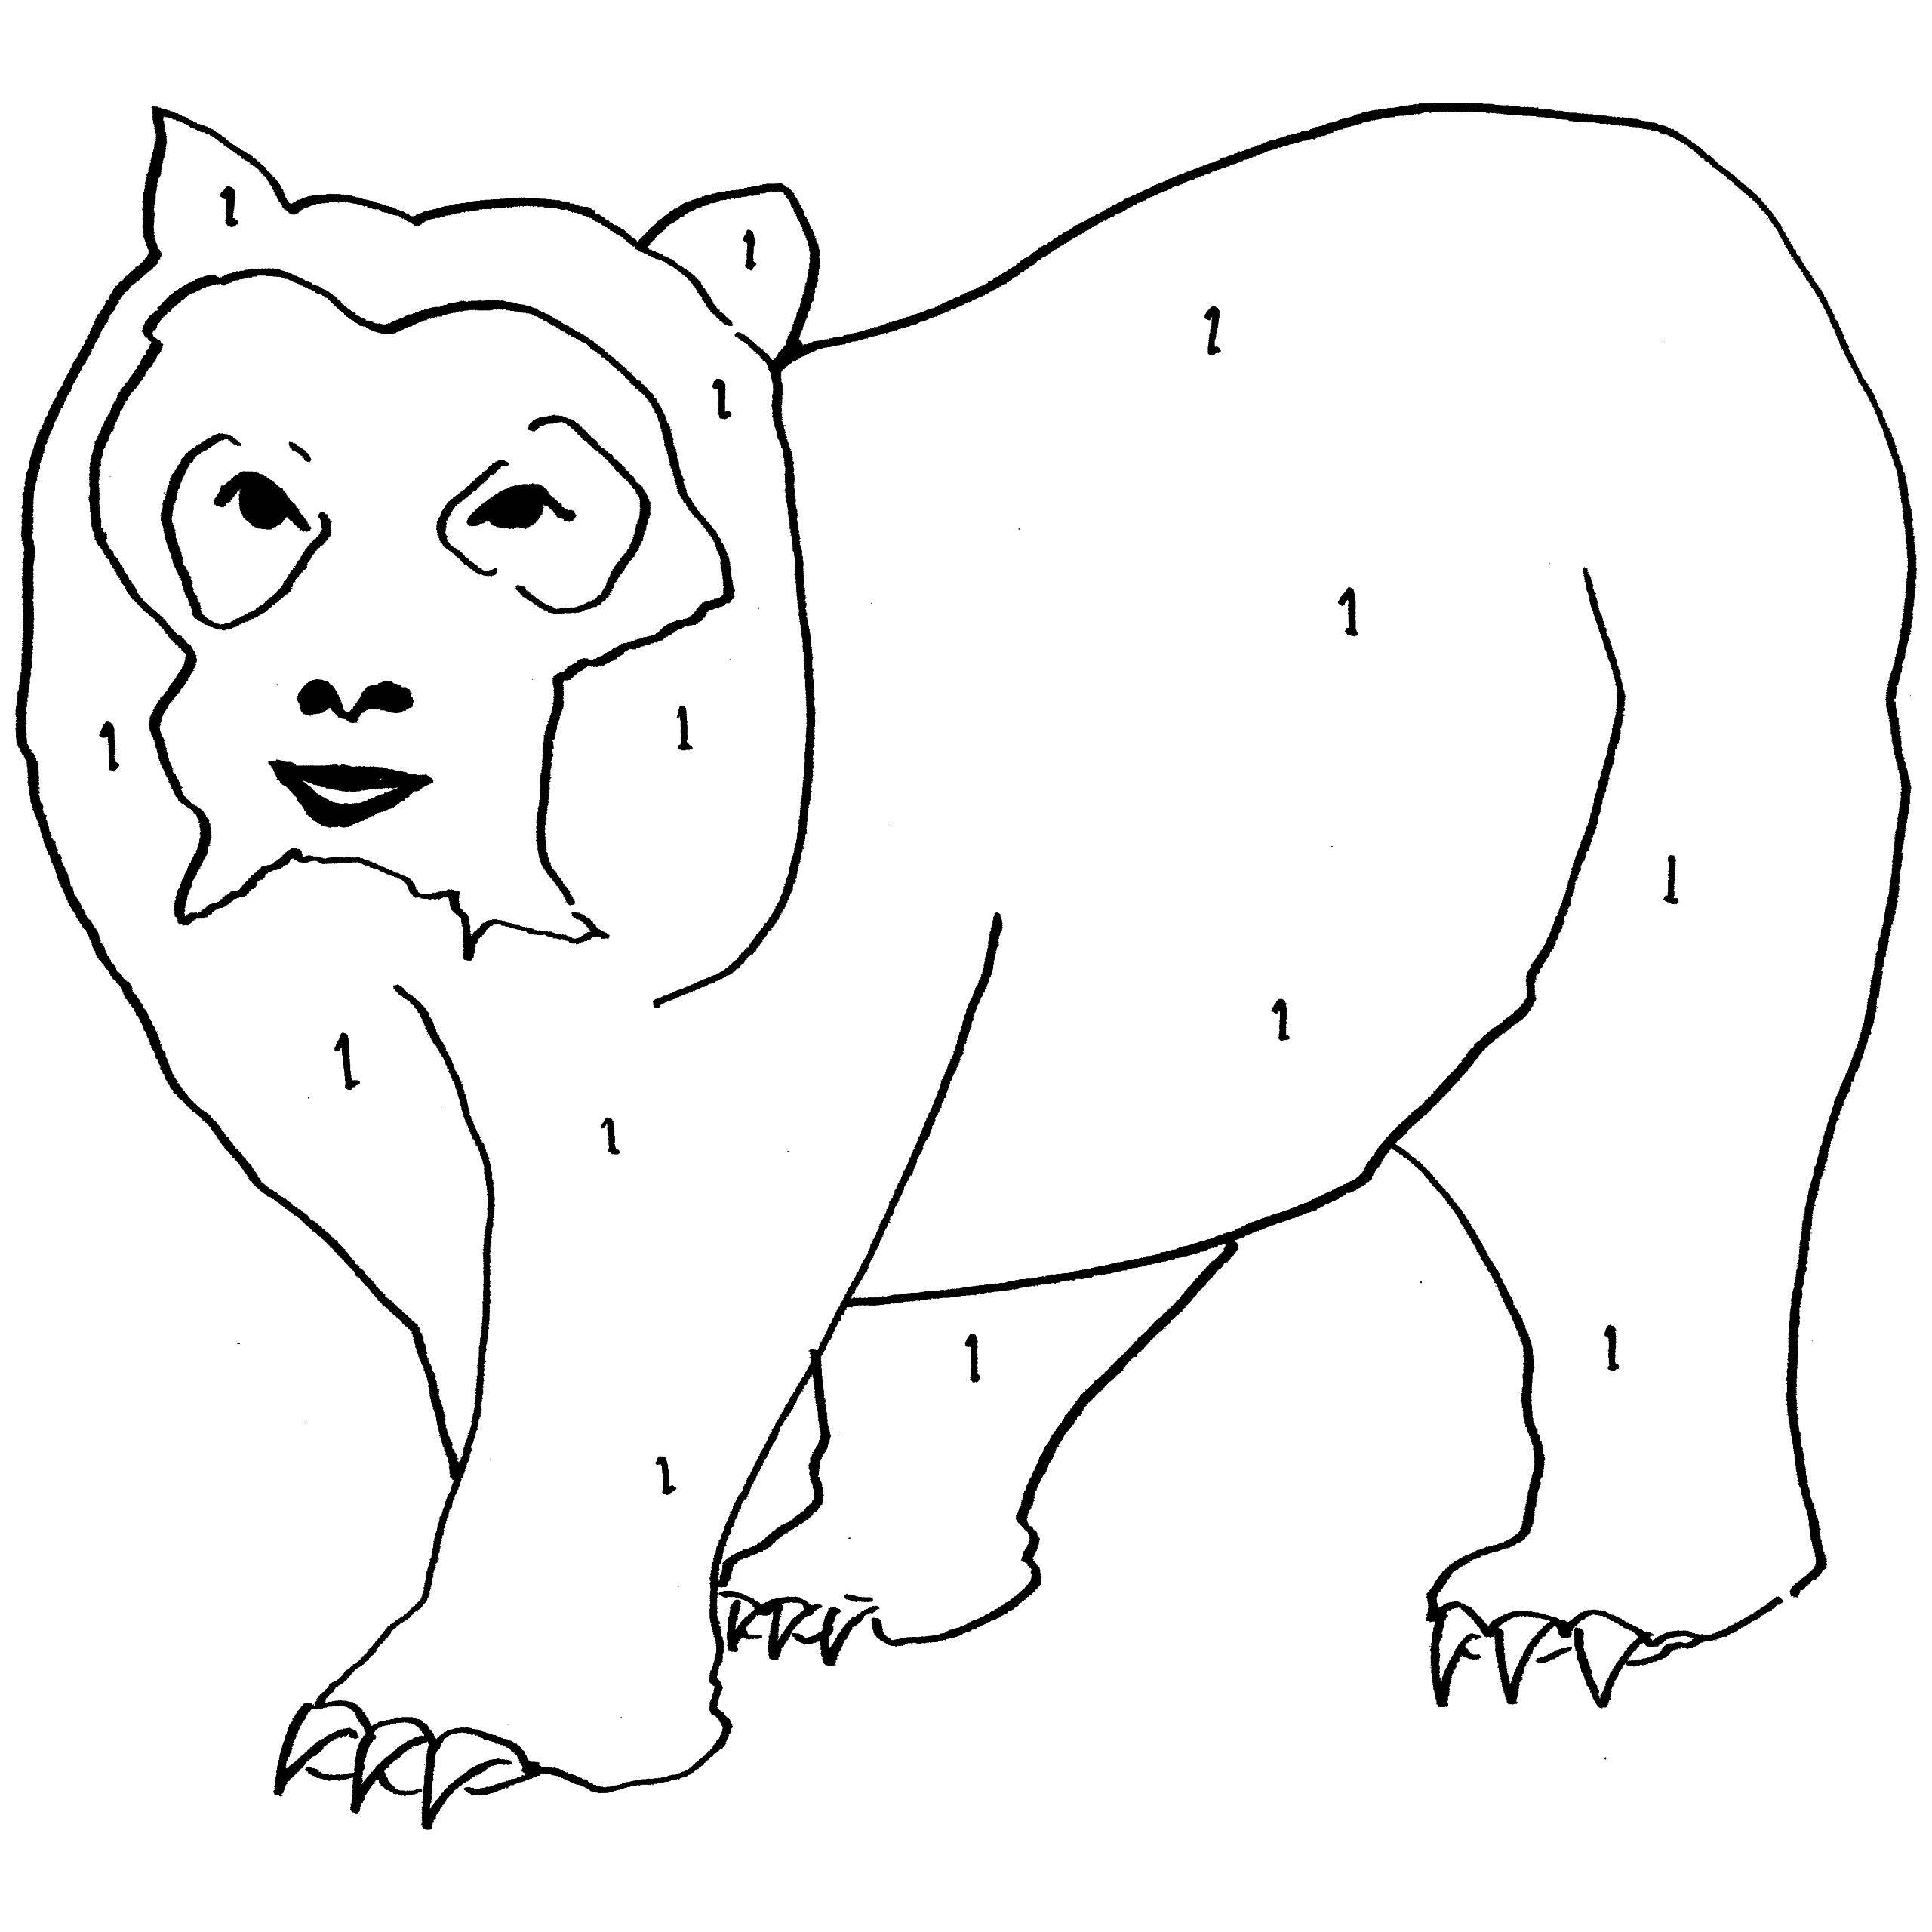 Spectacled Bear coloring #11, Download drawings